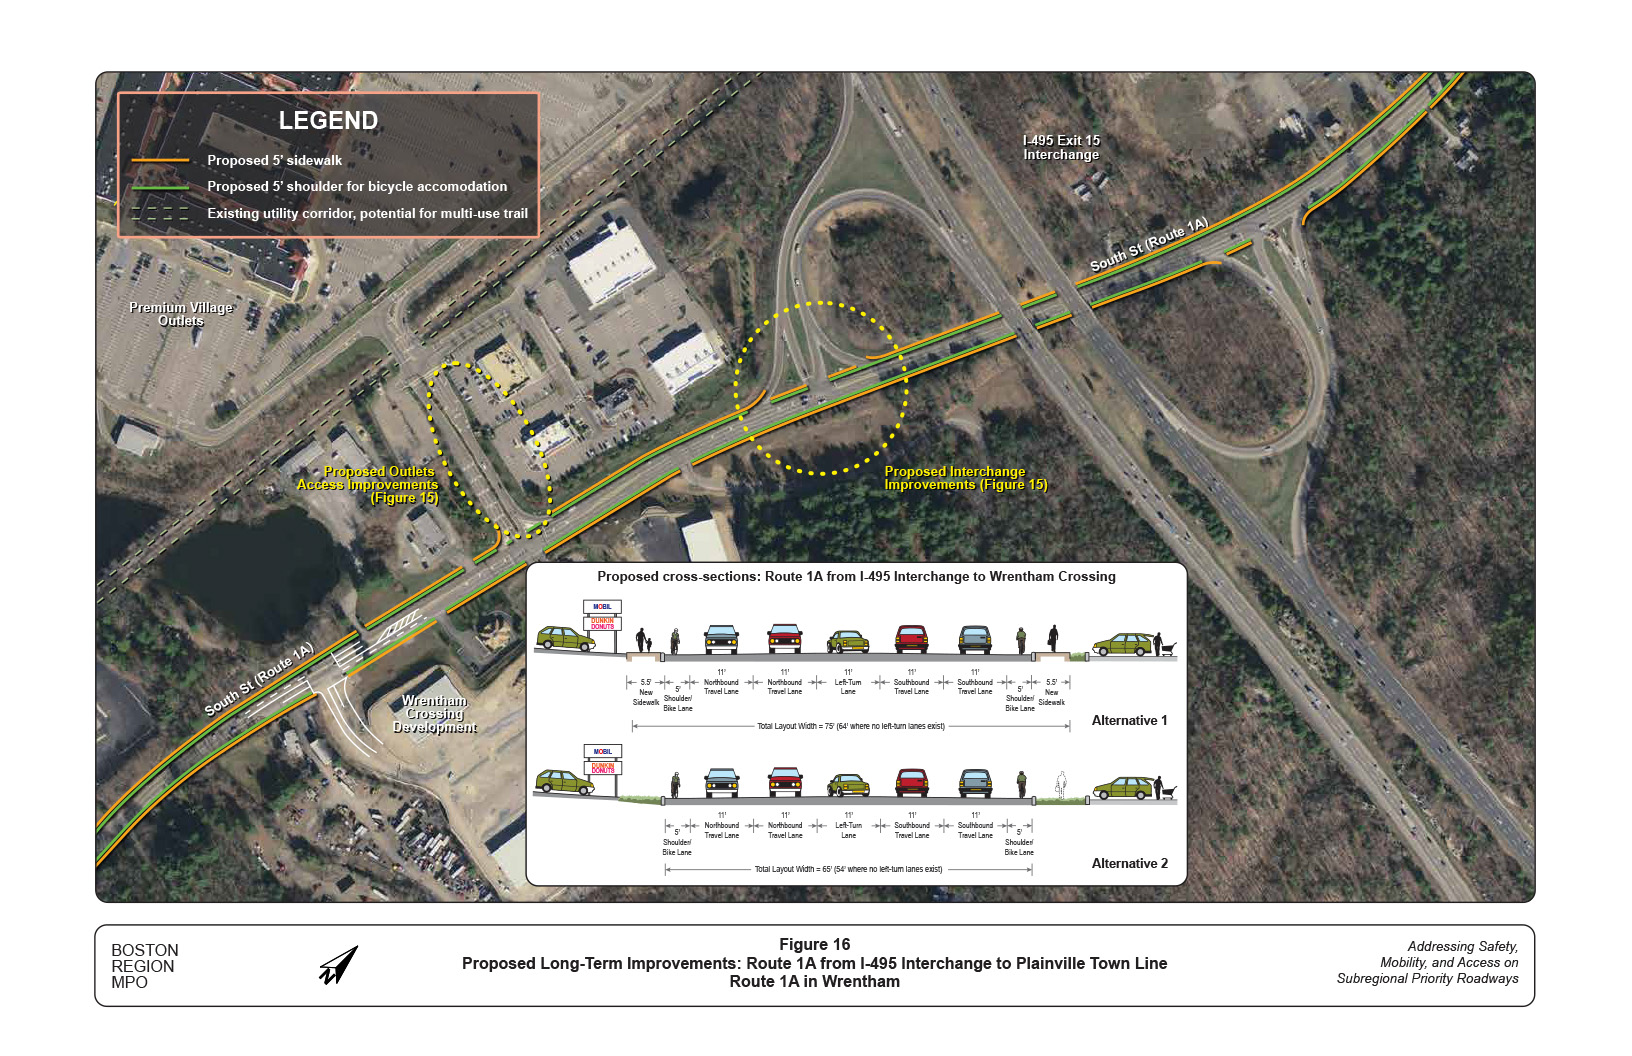 Figure 16 is a map that illustrates the proposed long-term improvements to sections of Route 1A between the Interstate 495 interchange and the Plainville town line. An inset contains an illustration of the proposed roadway cross sections.